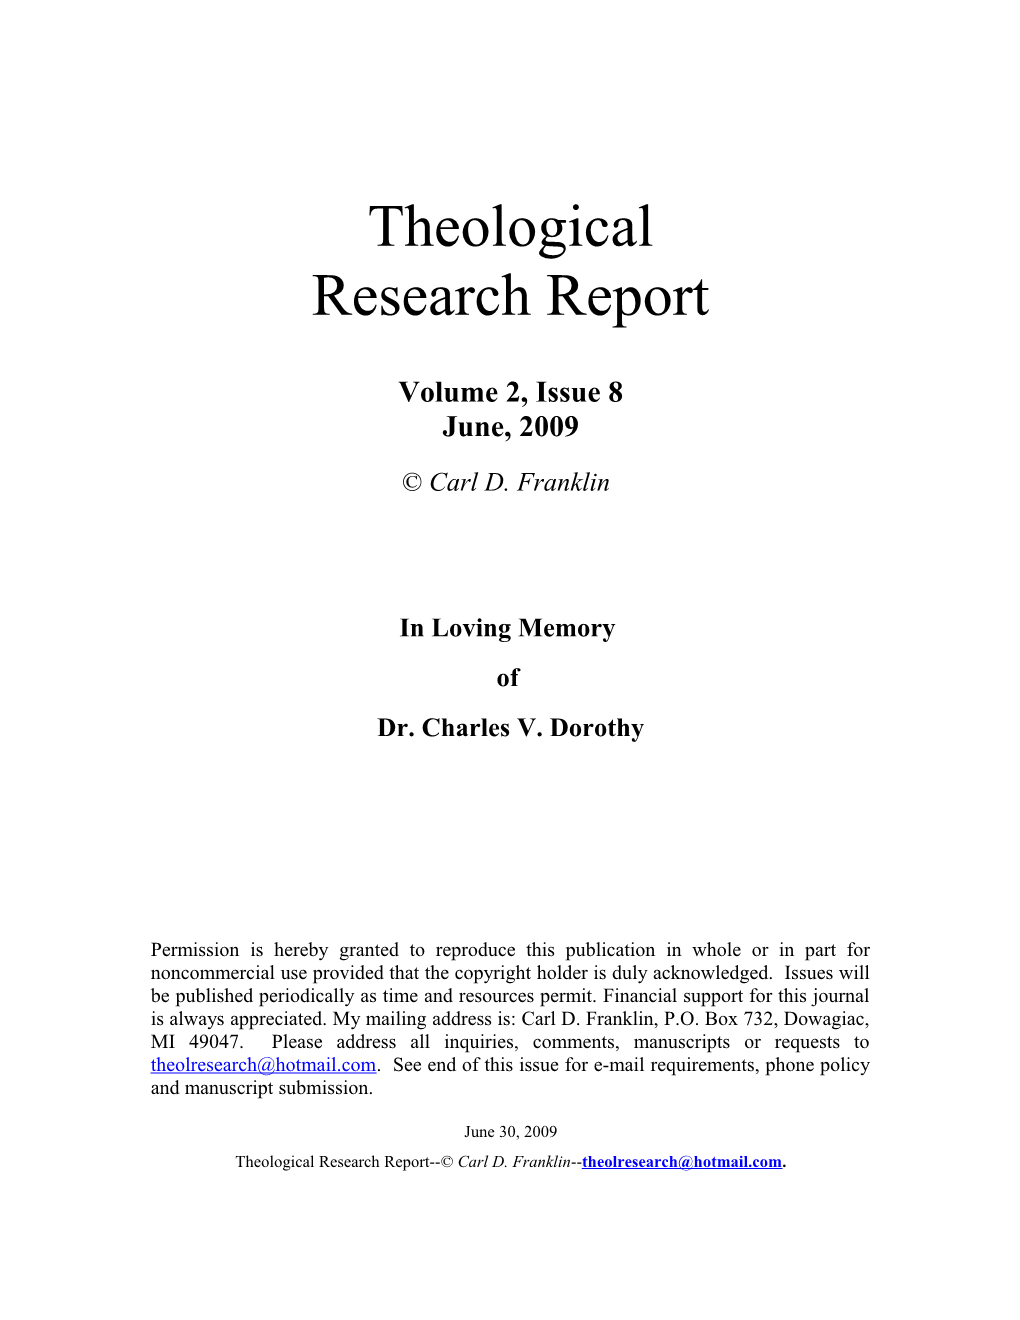 Theological Research Newsletter